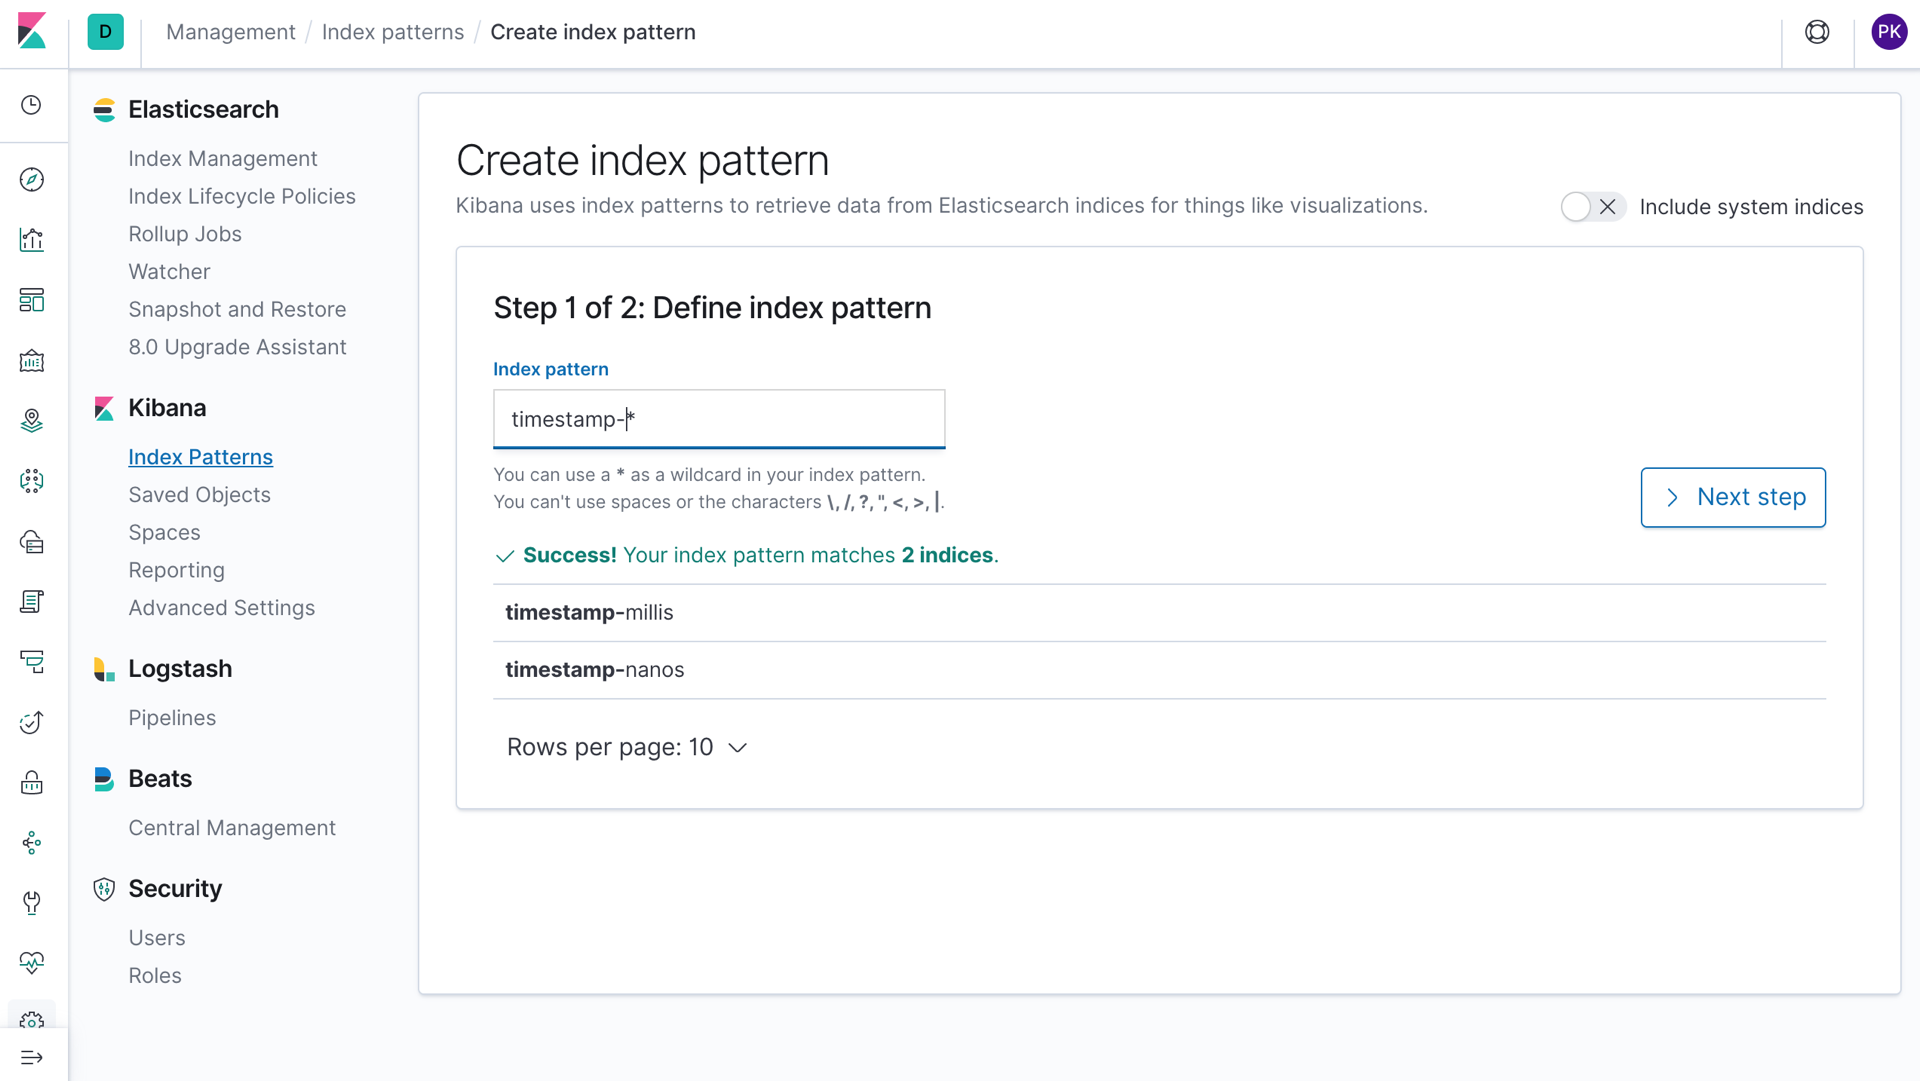 Creating the index pattern in Kibana